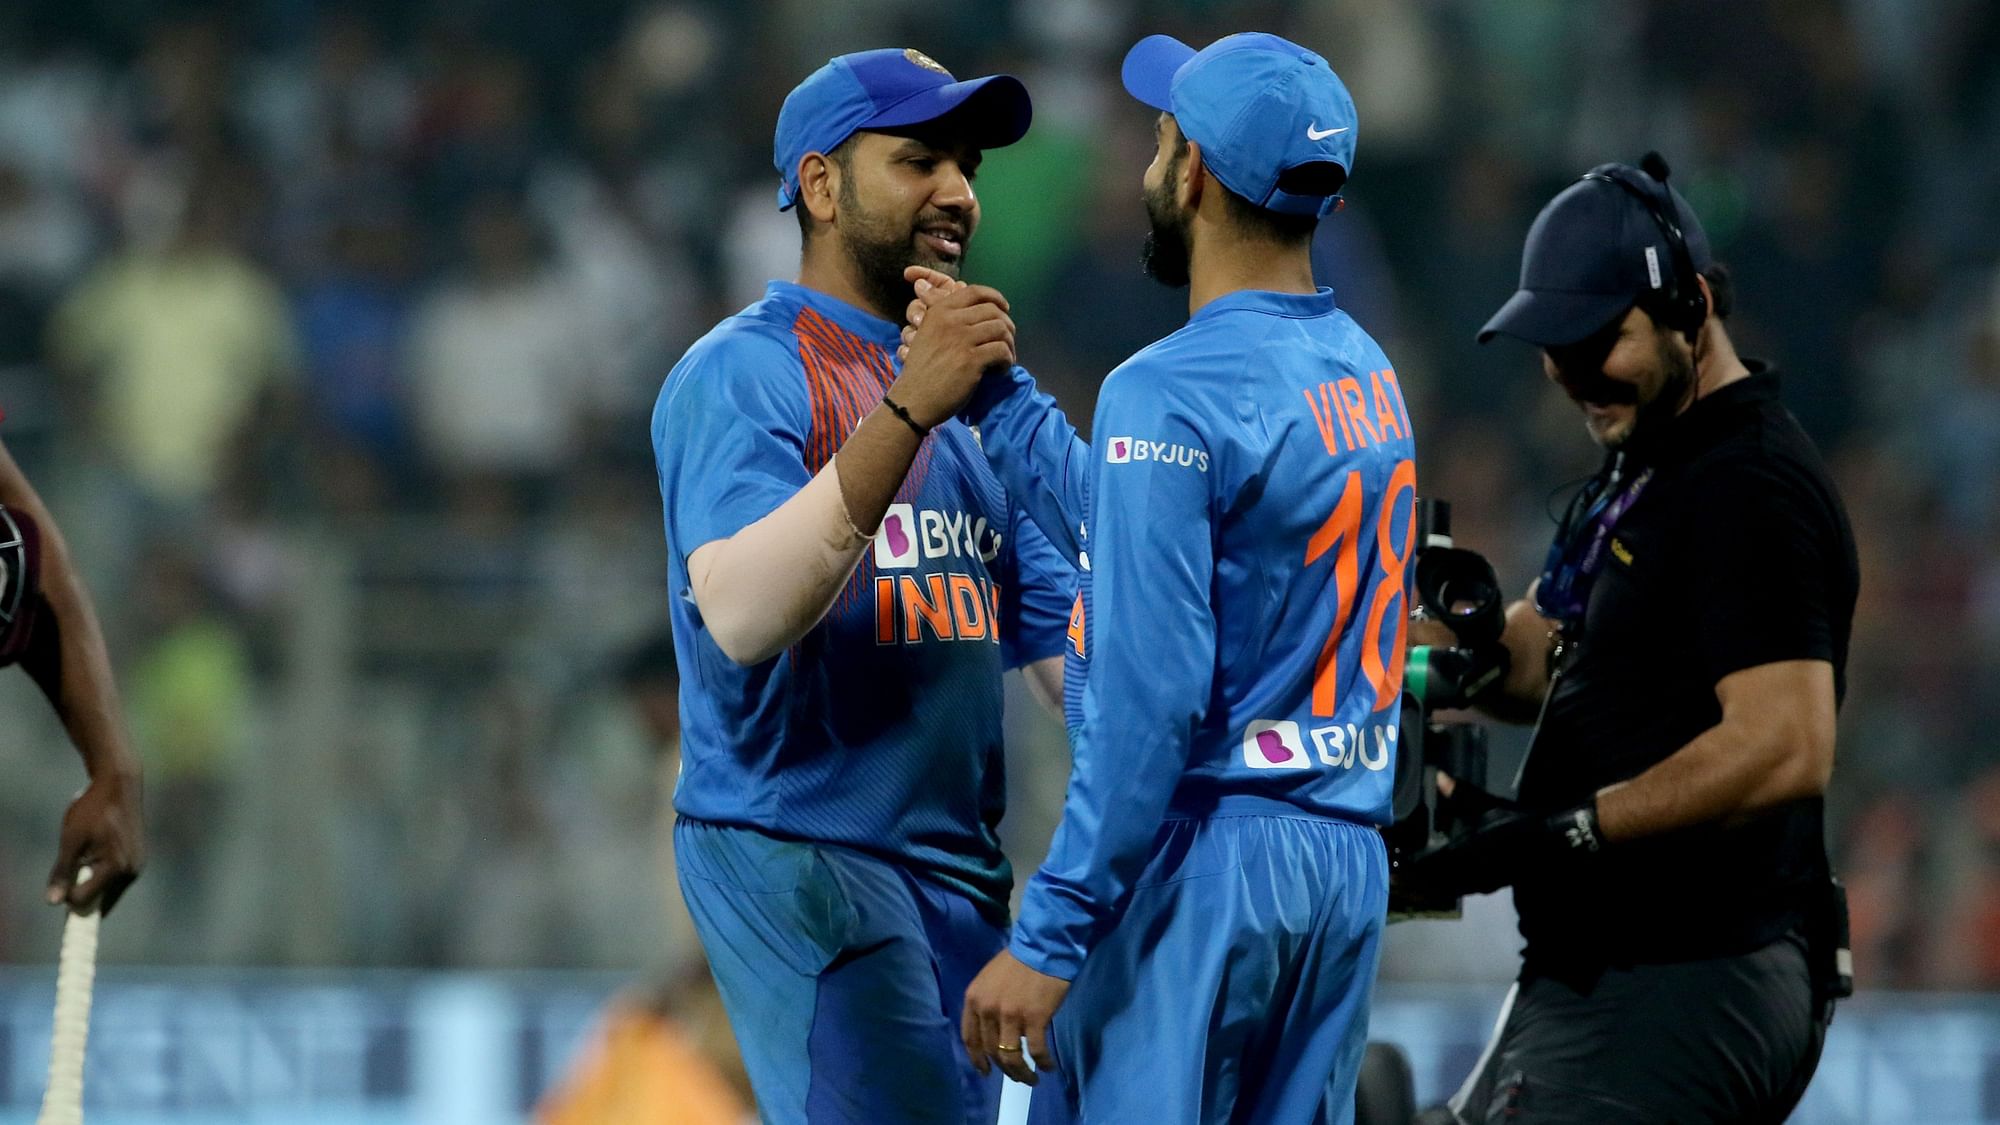 Many celebrities and fans took to twitter to congratulate the Indian team for the series win.